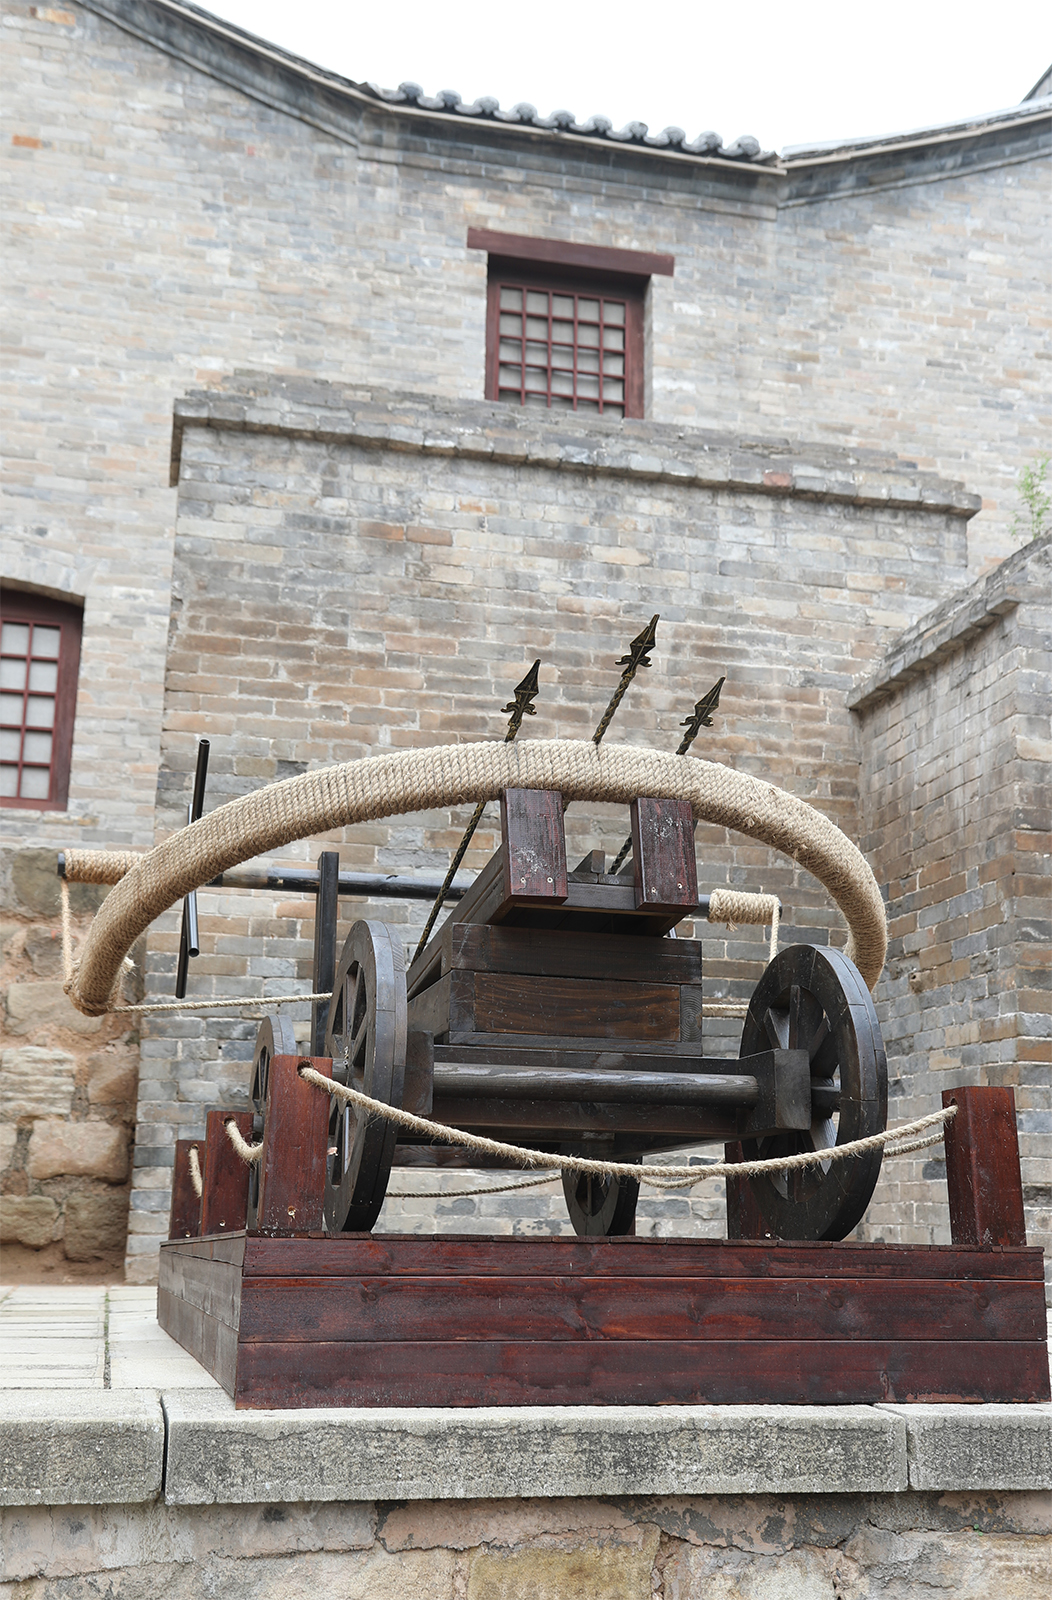 A cannon is seen at Xiangyu Ancient Castle. /CGTN